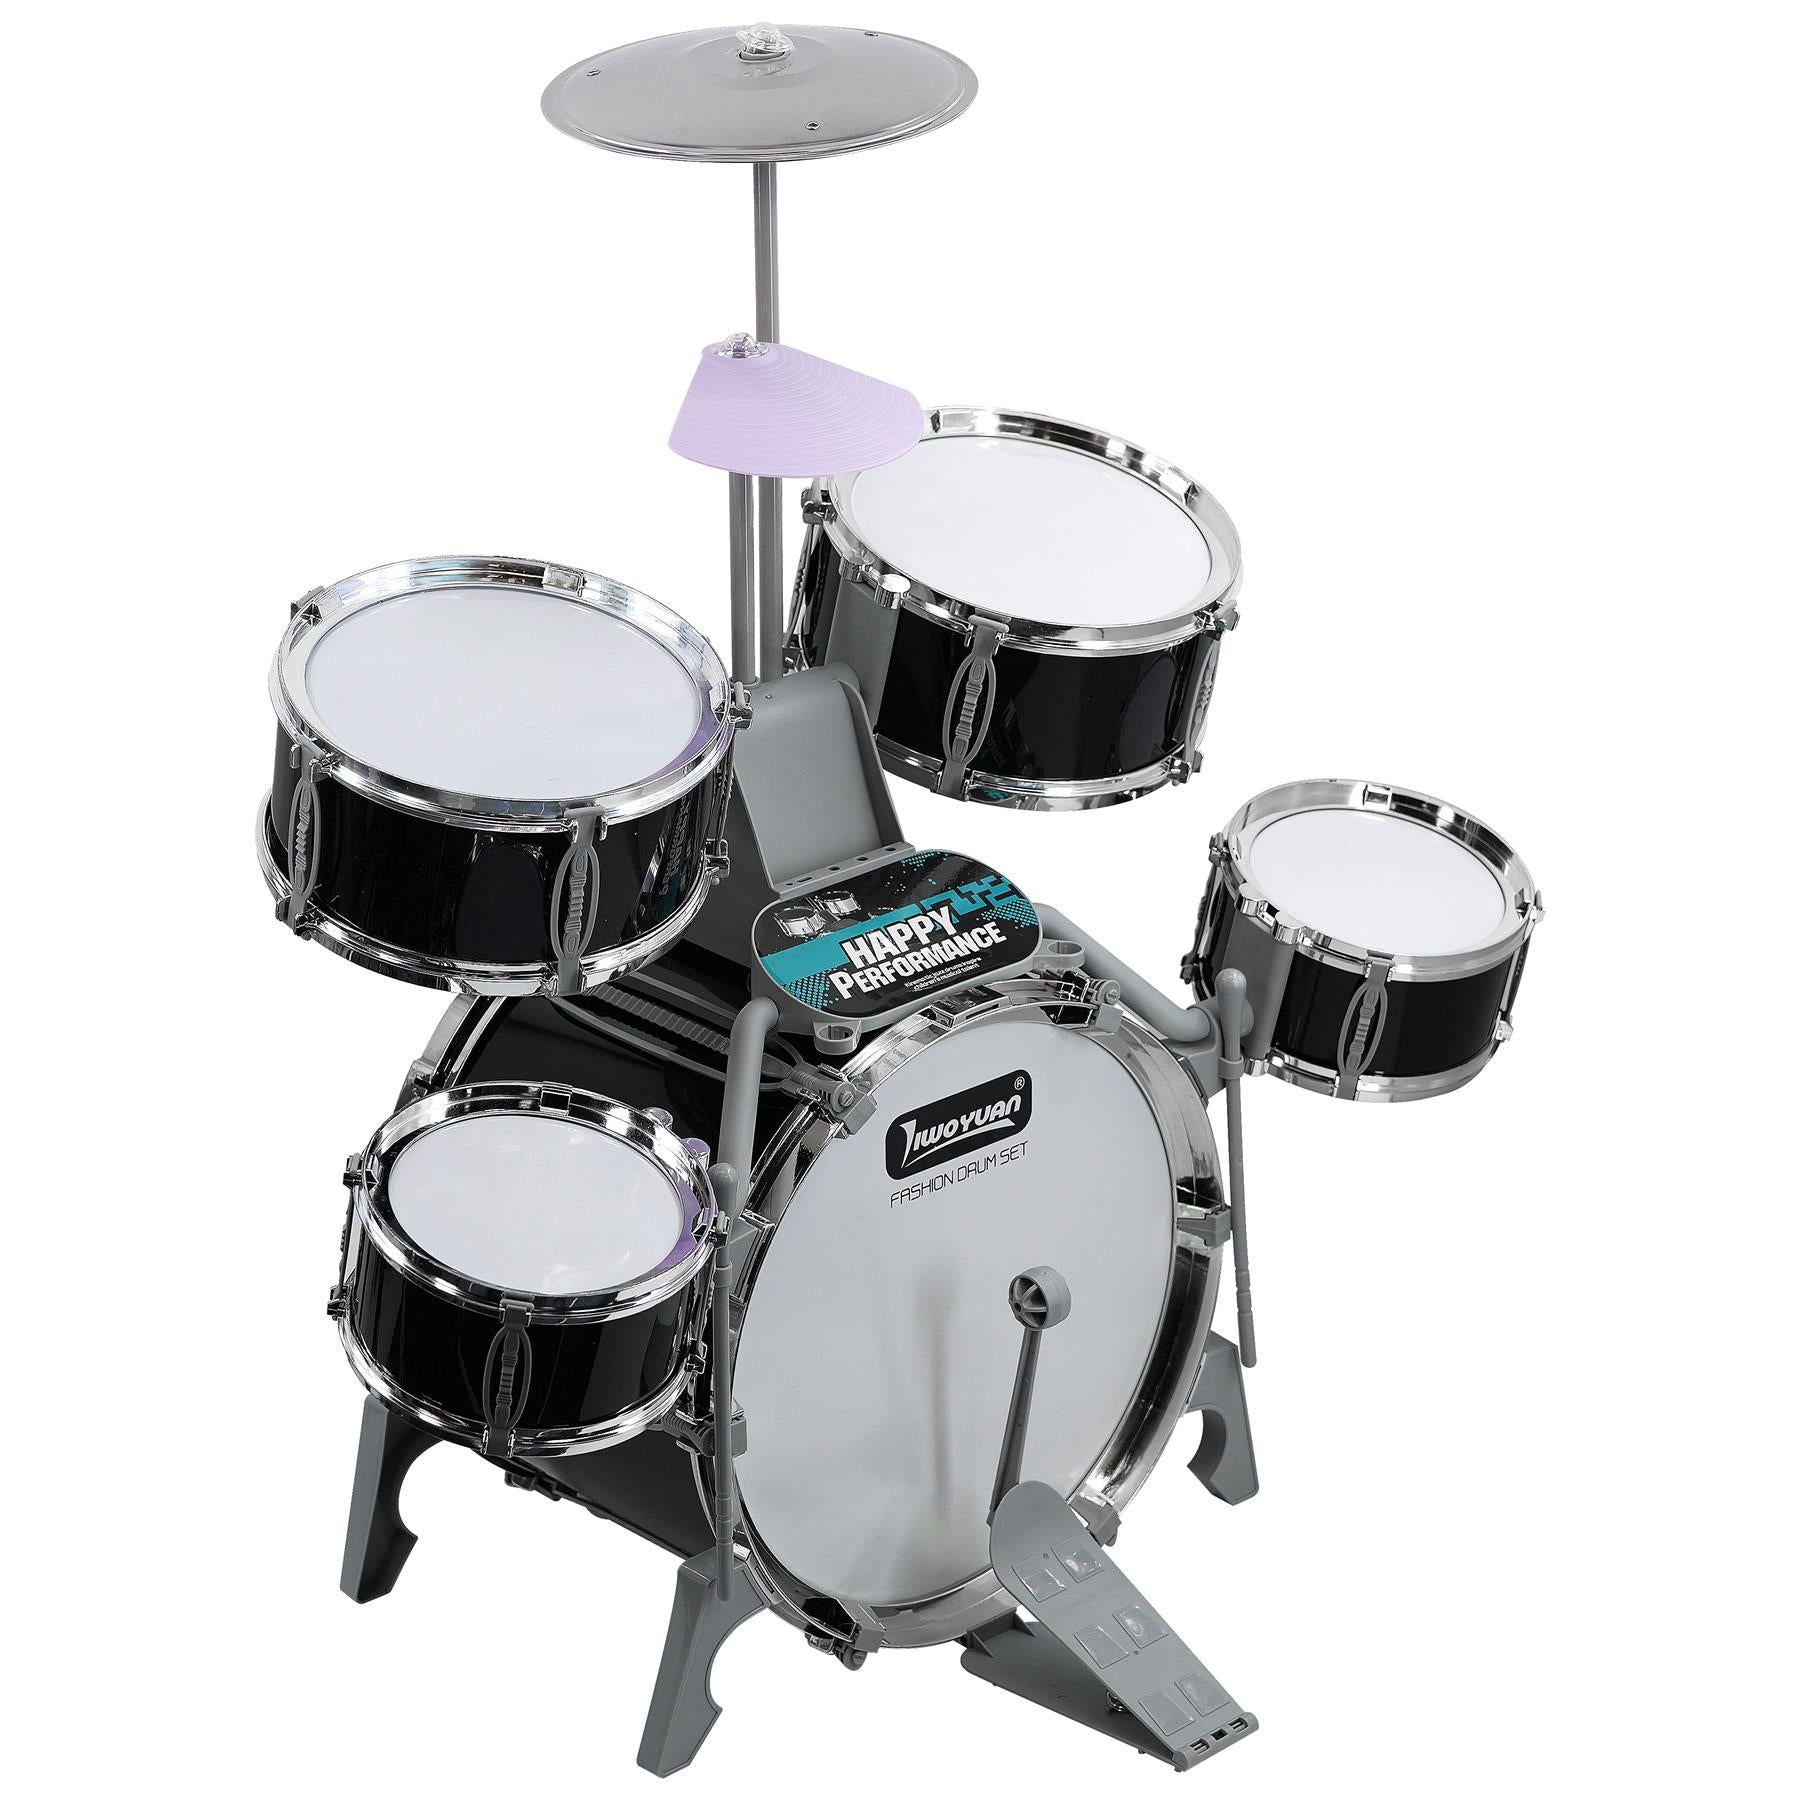 Black Multi functional Kids Jazz Drum Set by The Magic Toy Shop - The Magic Toy Shop